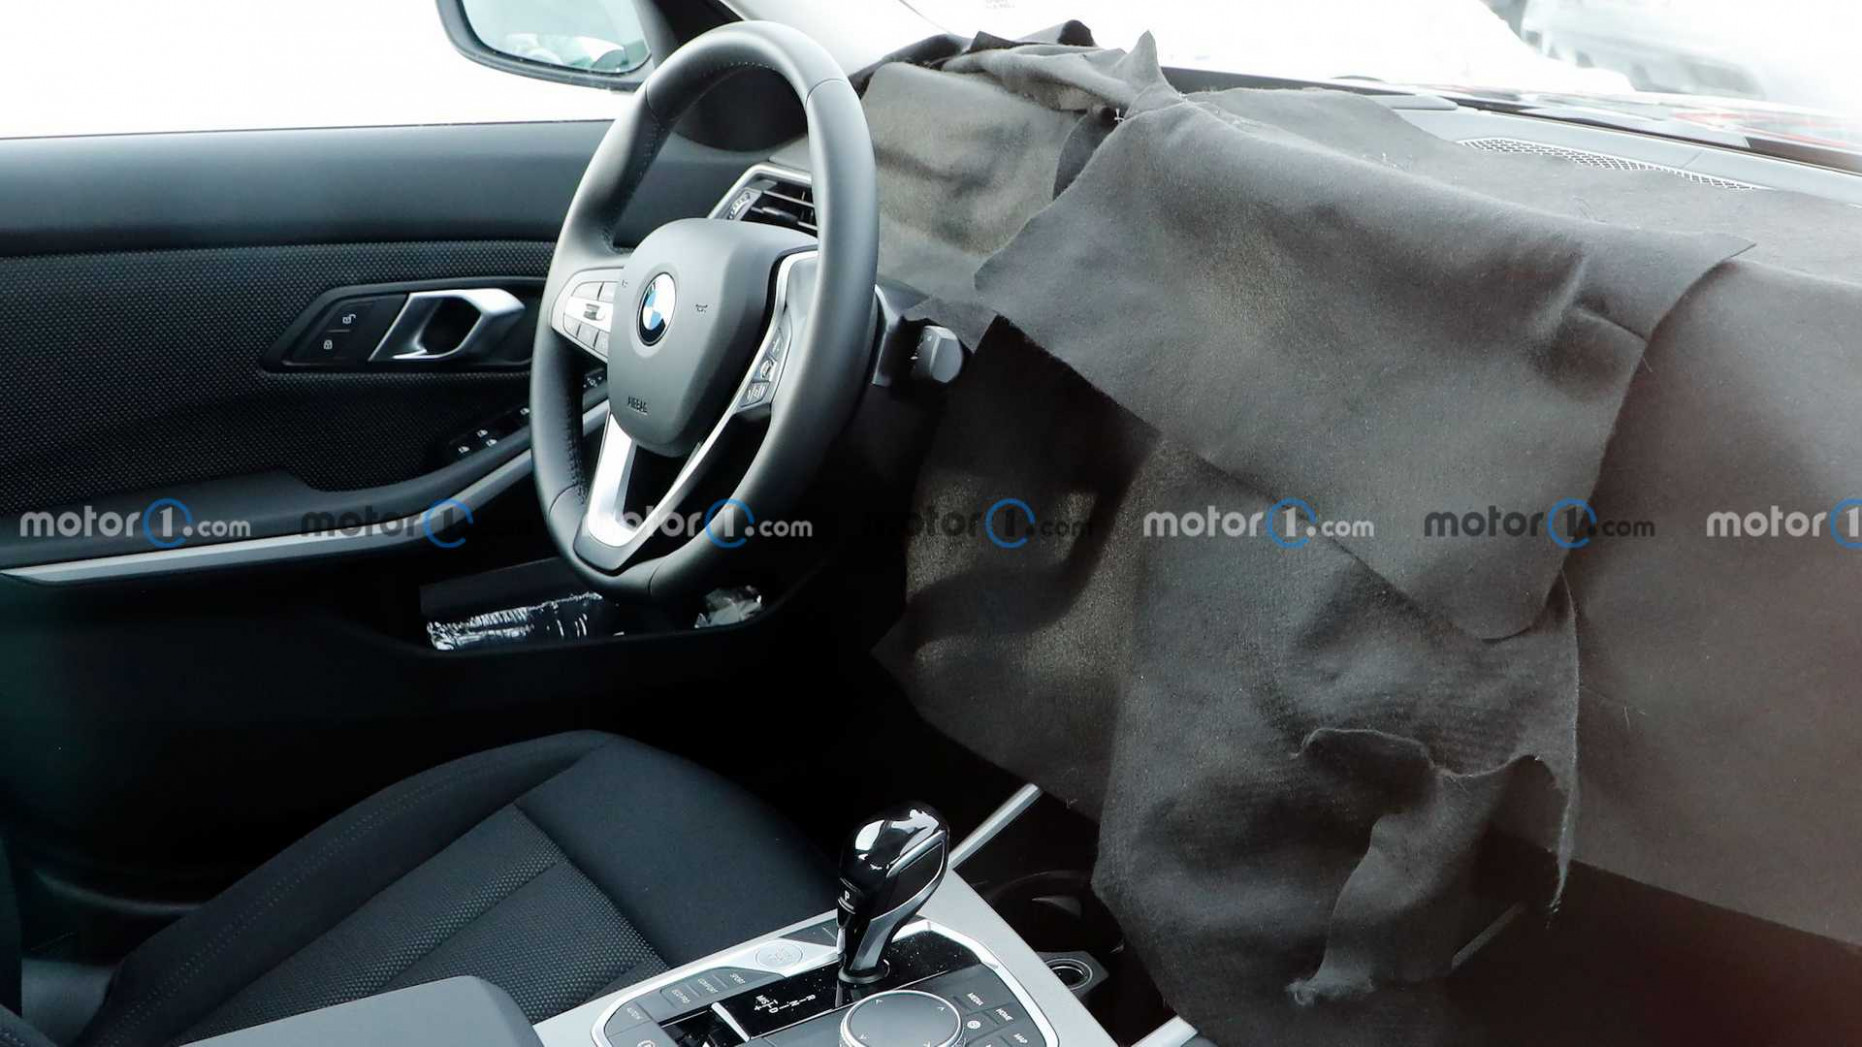 BMW 12 Series Spy Photos Reveal Redesigned Dash Coming With Facelift - Spy Shots BMW 3 Series